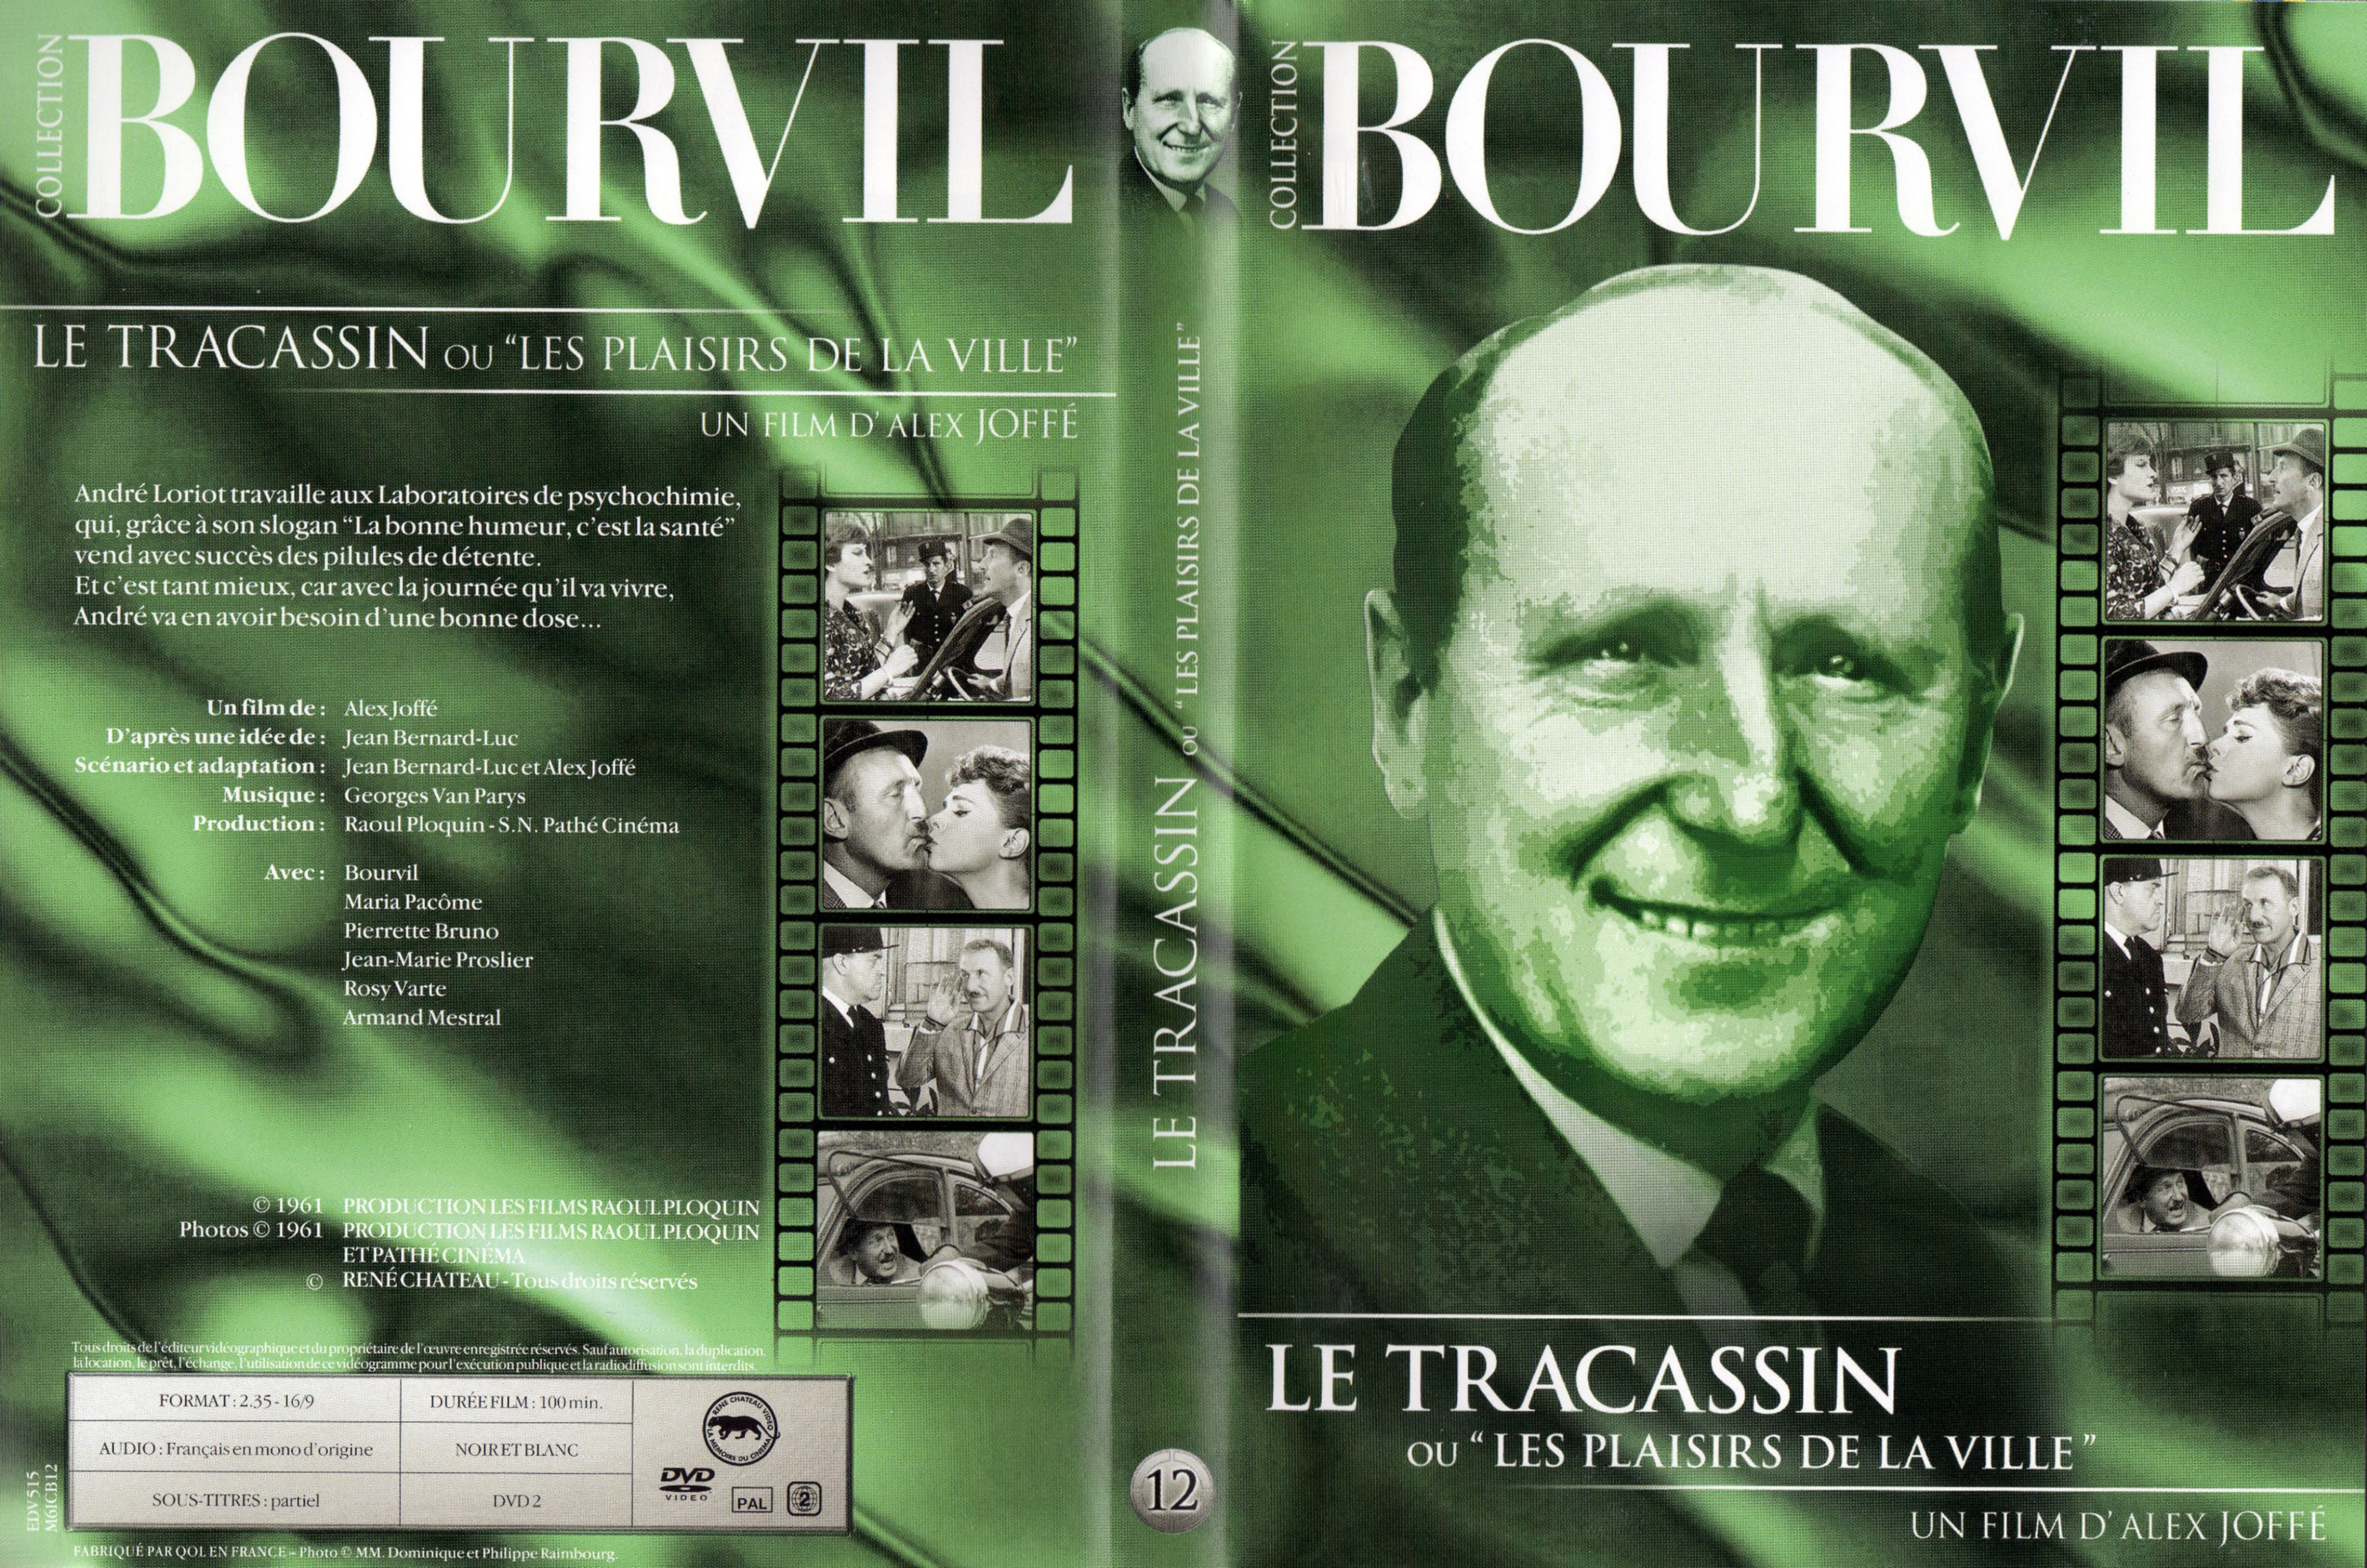 Jaquette DVD Le tracassin v2